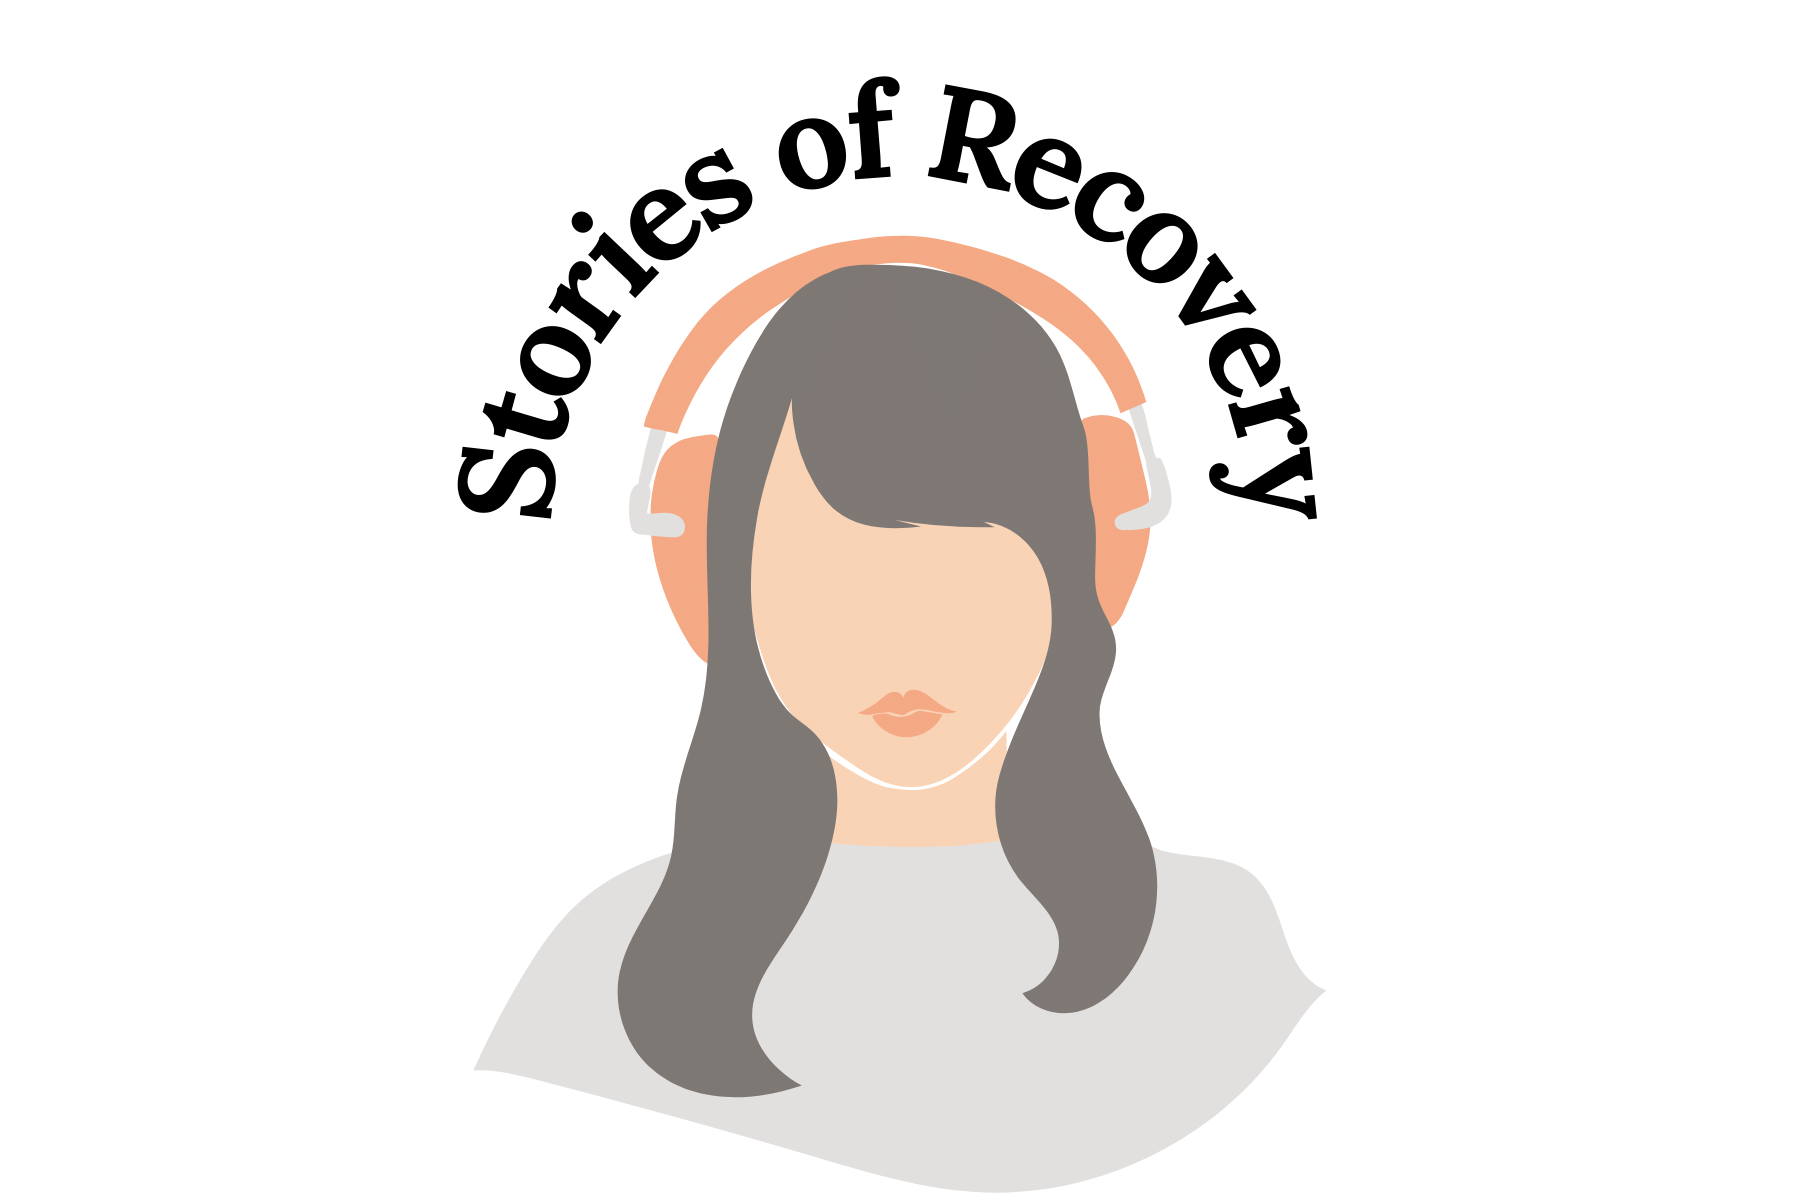 cartoon woman with earphones on and it says stories of recovery over her head